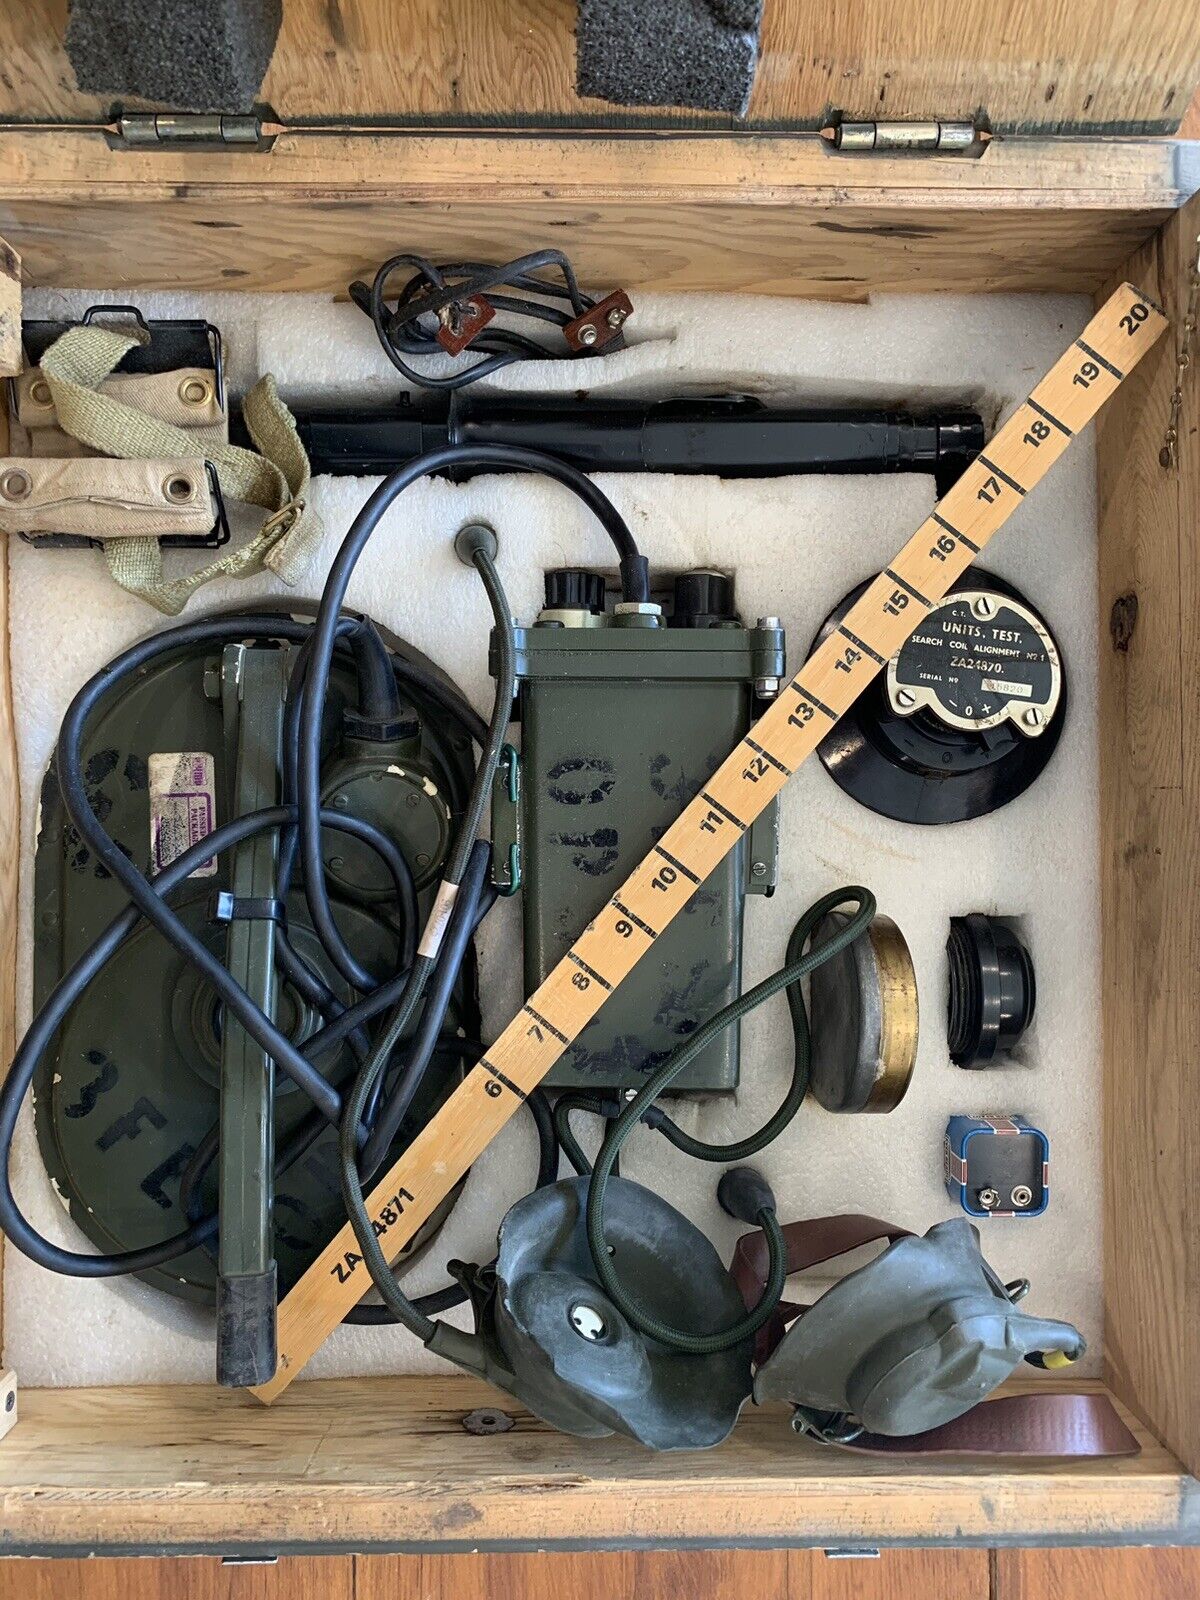 Vintage Military Mine Detector Kit In Awesome Wooden Crate- Maybe WW2?